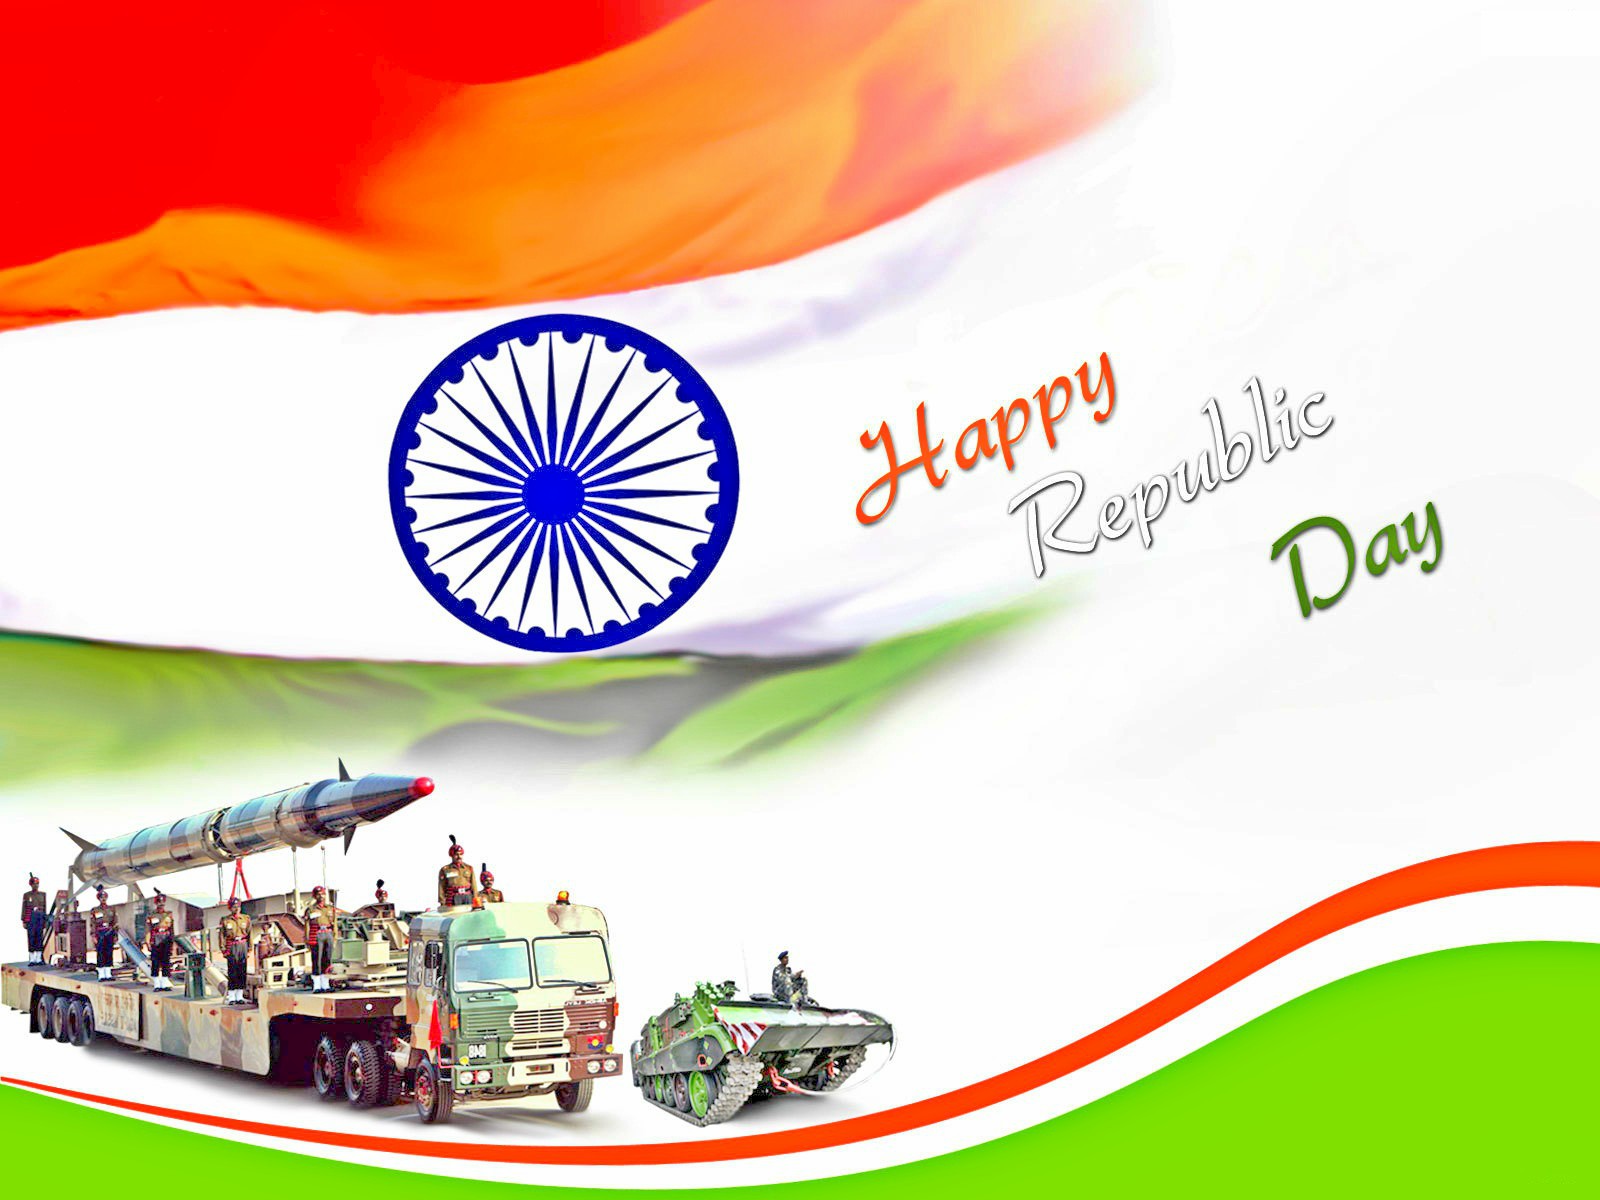 Happy Republic Day Images, Wallpapers, Photos 2023 Download HD